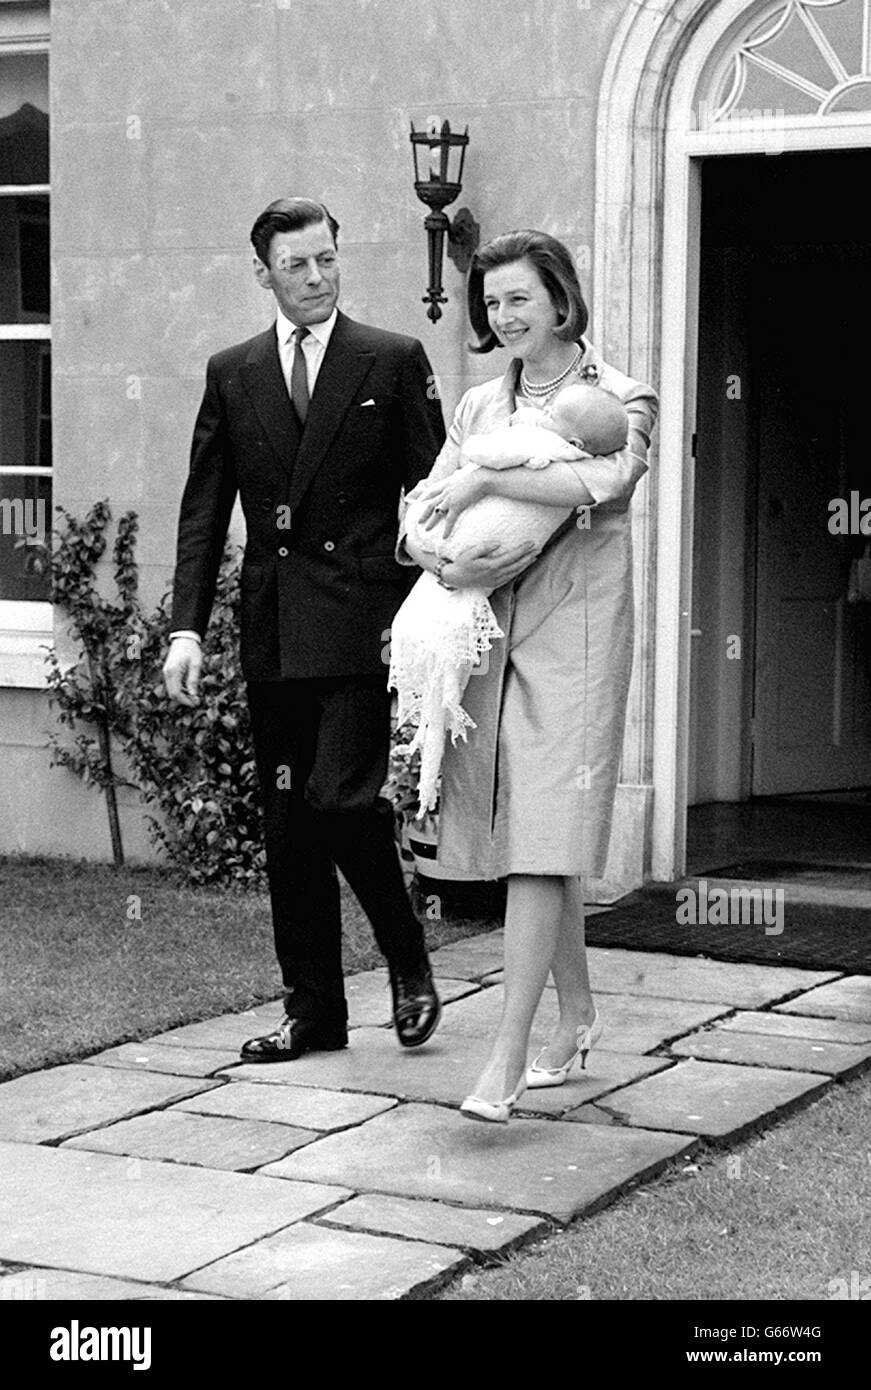 Princess Alexandra cradles her infant son James Robert Bruce in her arms as, with Mr Angus Ogilvy, she leaves her home at Thatched House Lodge, Richmond Park. 26/12/04: Sir Angus Ogilvy died. Stock Photo